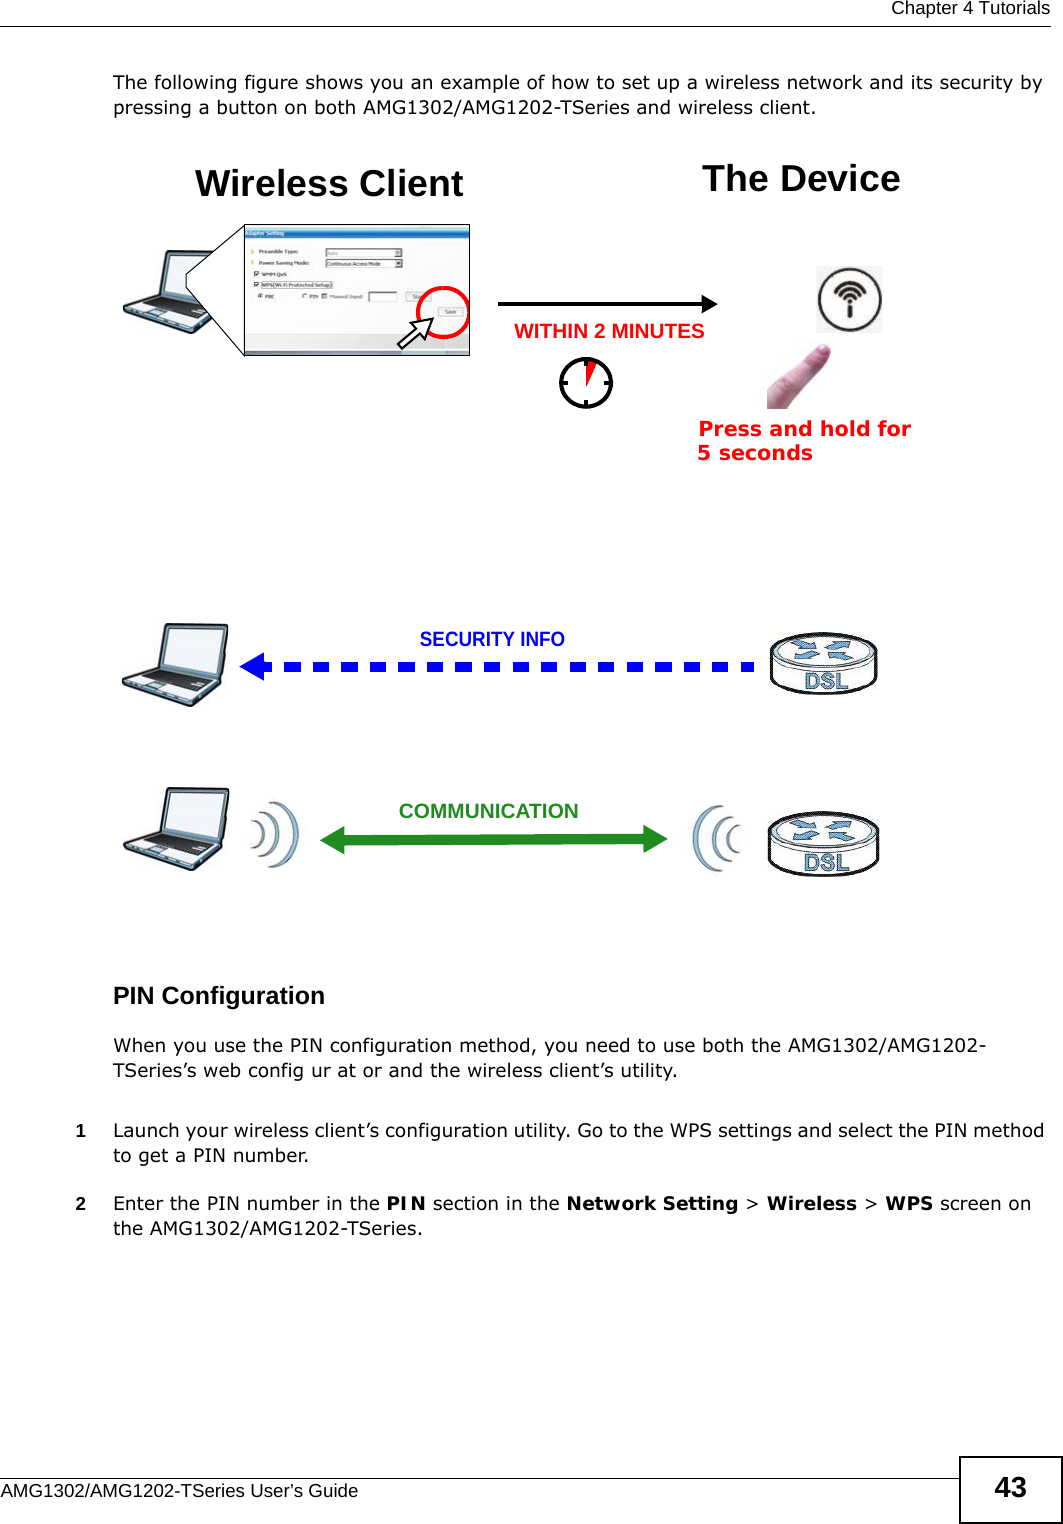  Chapter 4 TutorialsAMG1302/AMG1202-TSeries User’s Guide 43The following figure shows you an example of how to set up a wireless network and its security by pressing a button on both AMG1302/AMG1202-TSeries and wireless client.Example WPS Process: PBC MethodPIN ConfigurationWhen you use the PIN configuration method, you need to use both the AMG1302/AMG1202-TSeries’s web config ur at or and the wireless client’s utility.1Launch your wireless client’s configuration utility. Go to the WPS settings and select the PIN method to get a PIN number.   2Enter the PIN number in the PIN section in the Network Setting &gt; Wireless &gt; WPS screen on the AMG1302/AMG1202-TSeries. Wireless Client The DeviceSECURITY INFOCOMMUNICATIONWITHIN 2 MINUTESPress and hold for   5 seconds